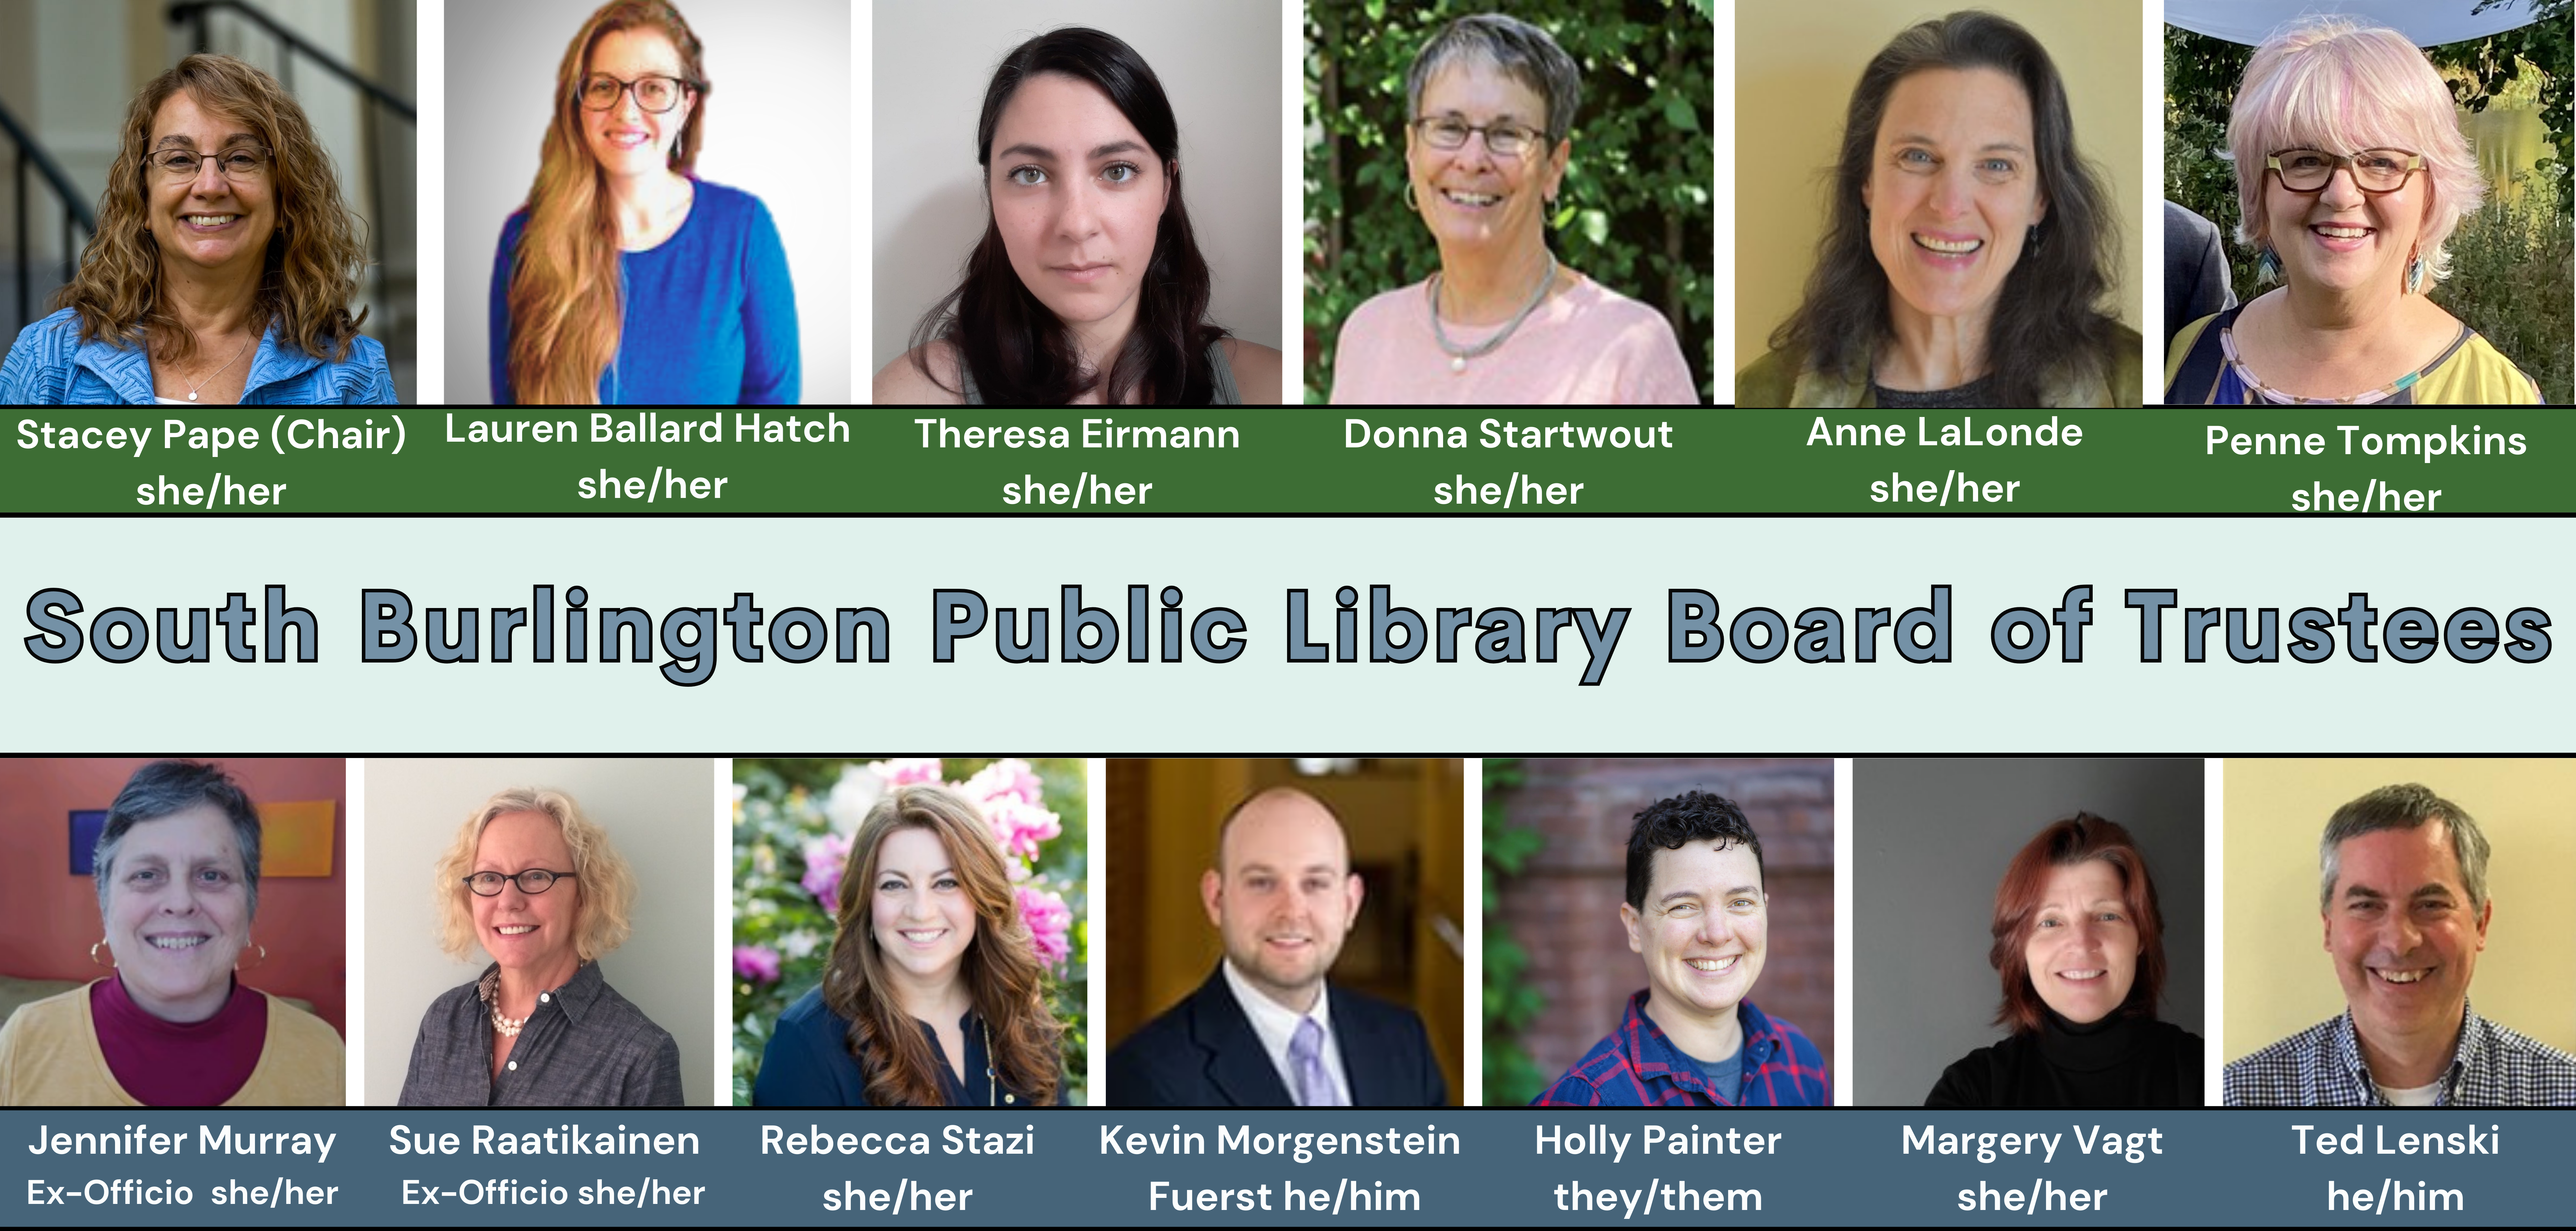 South Burlington Public Library Board of Trustees with photographs of each member